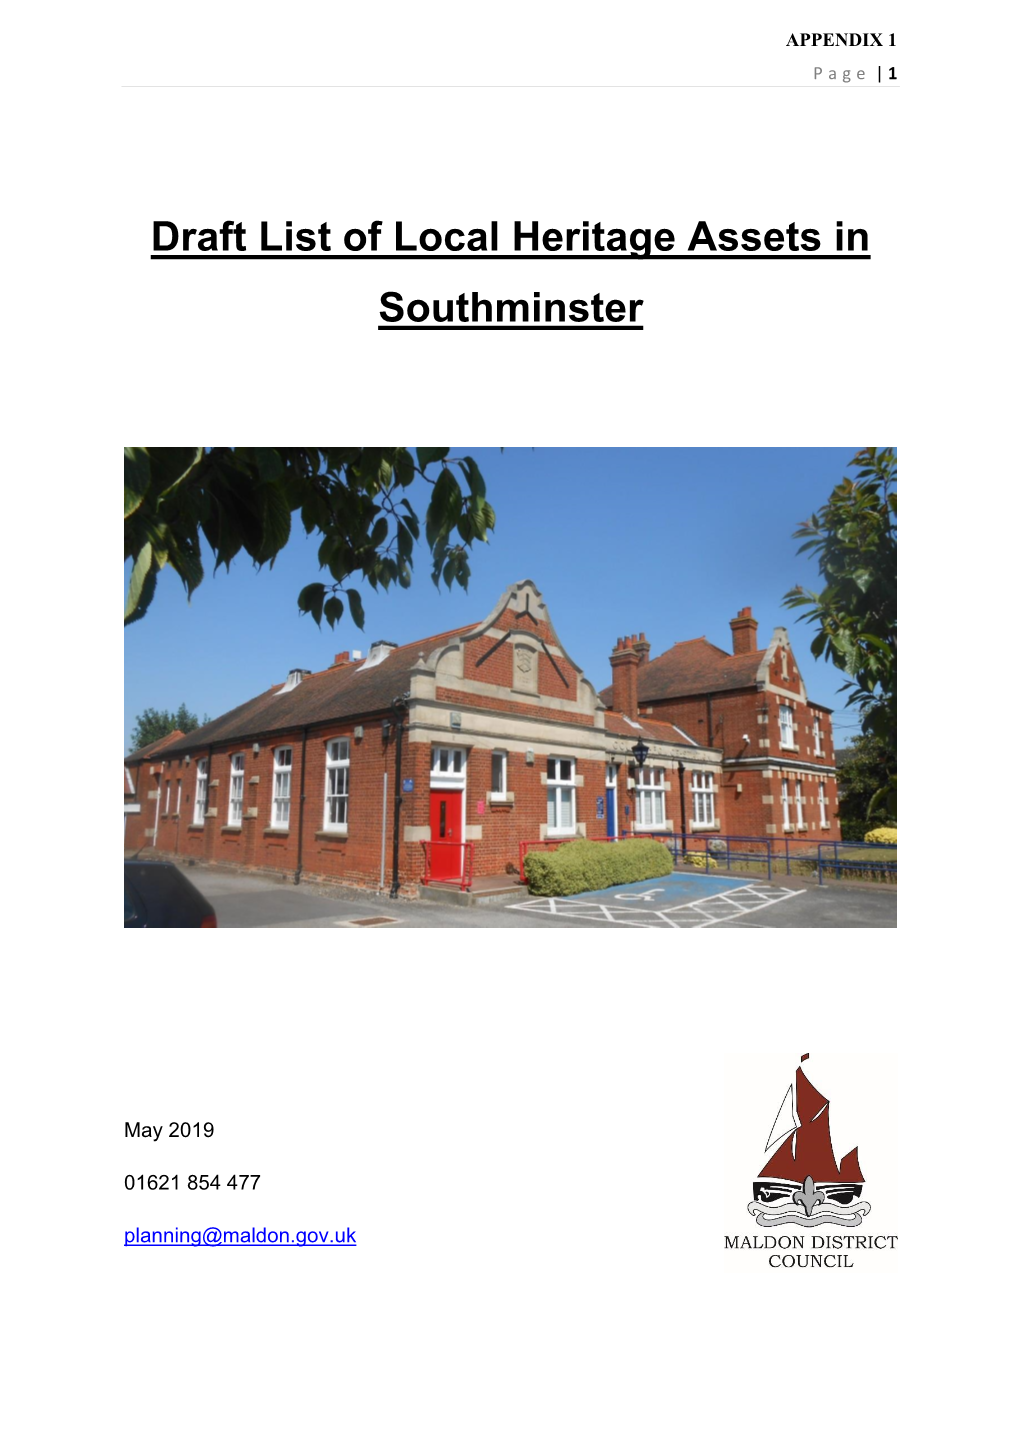 Draft List of Local Heritage Assets in Southminster